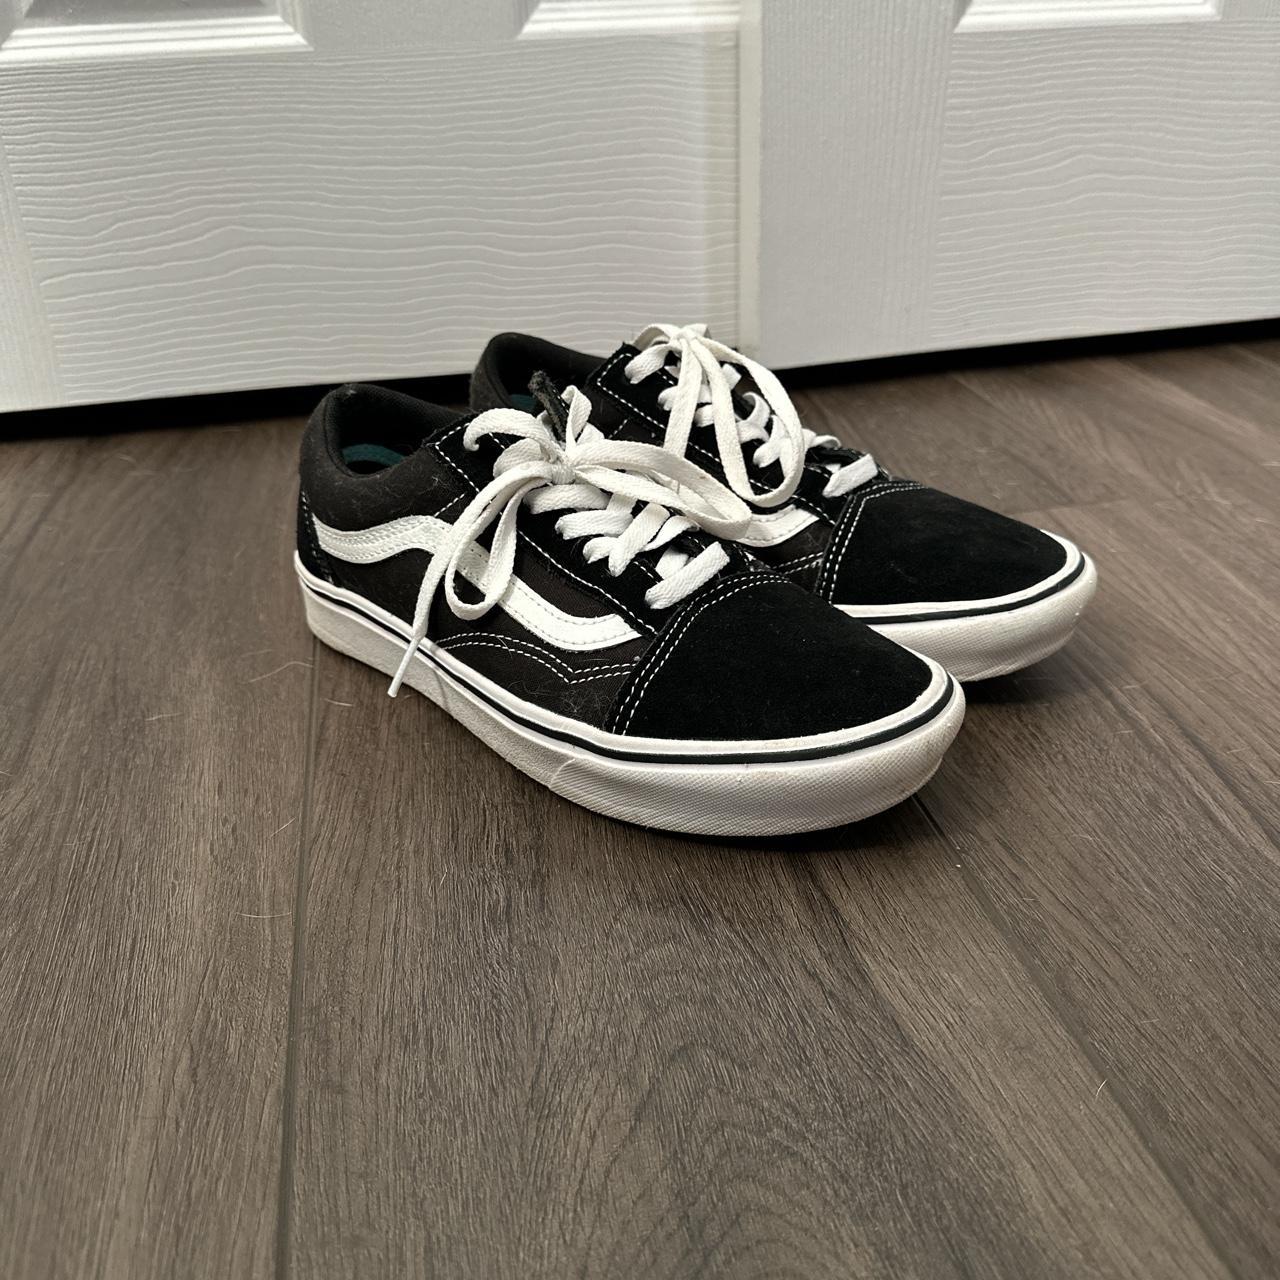 Old Skool ComfyCush Vans. Size 7.5 but these tend to... - Depop